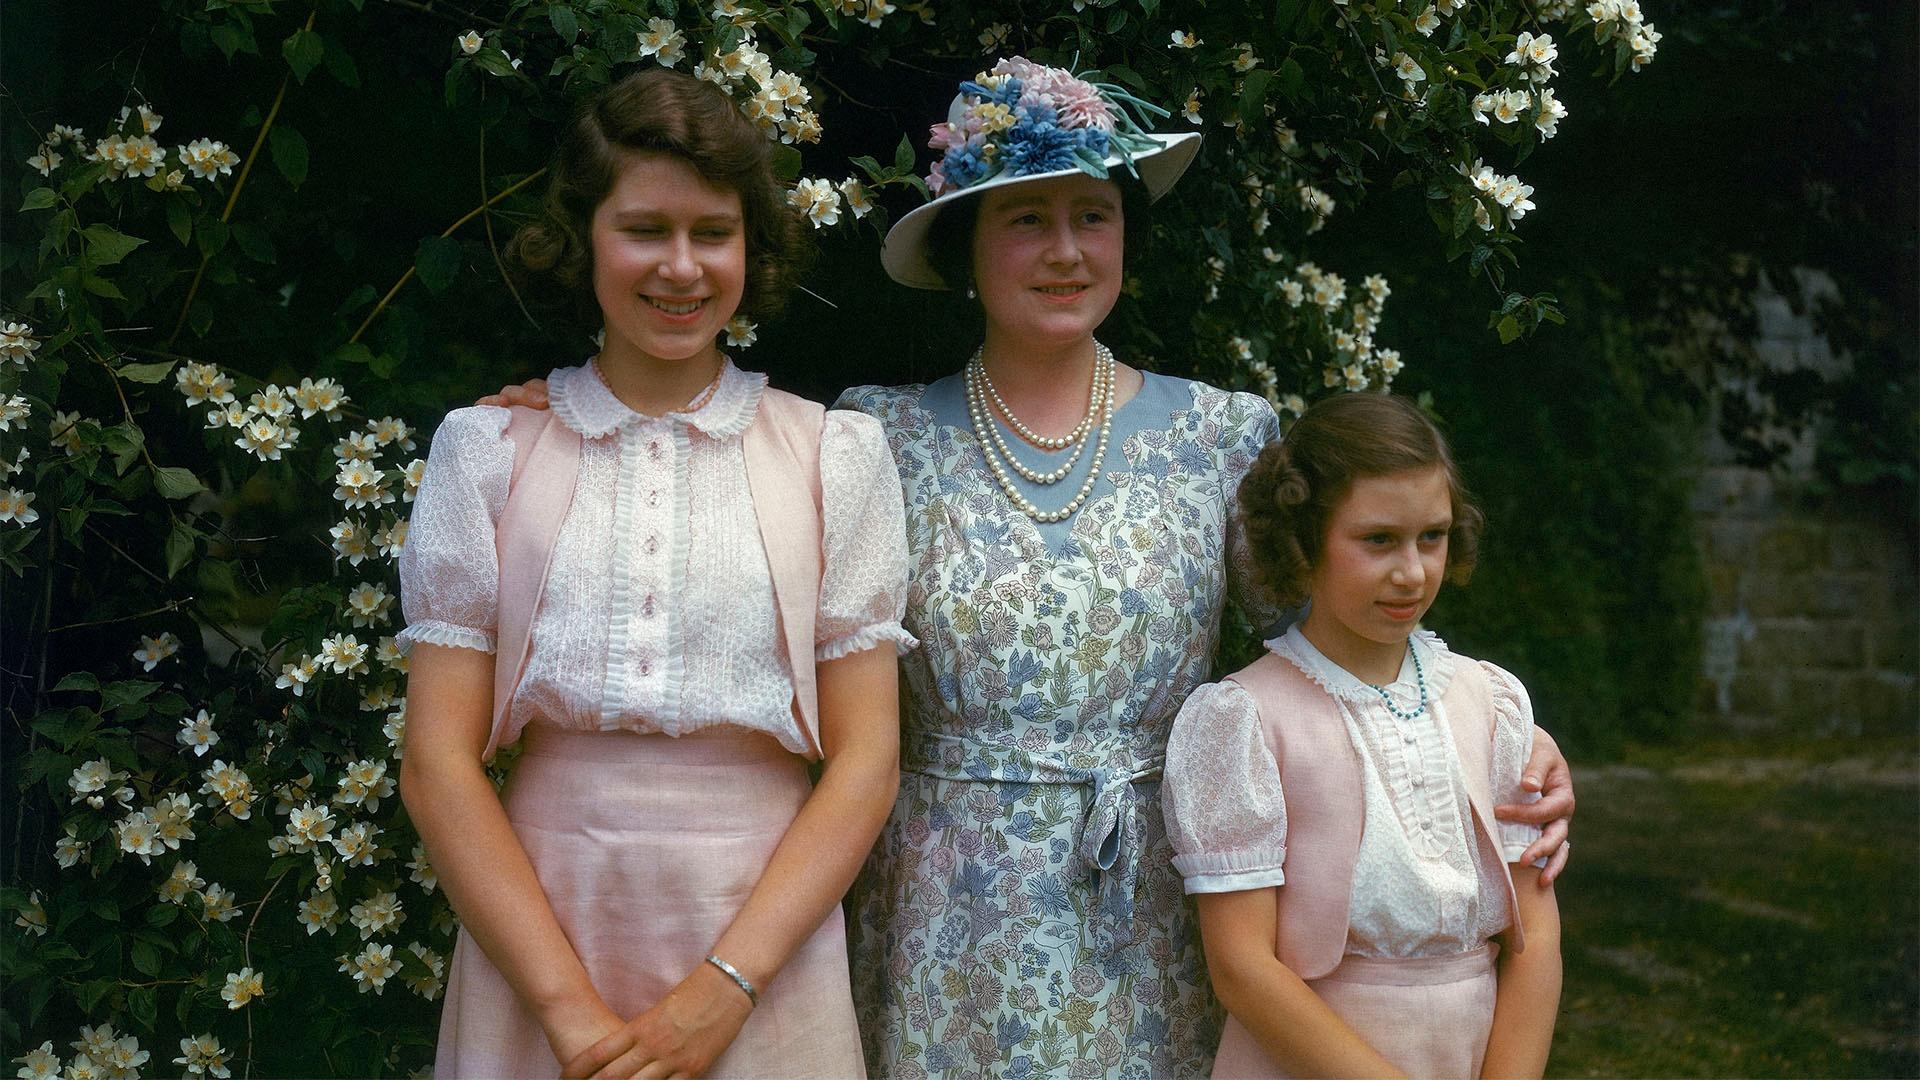 Queen Elizabeth with the young Princesses Elizabeth and Margaret.